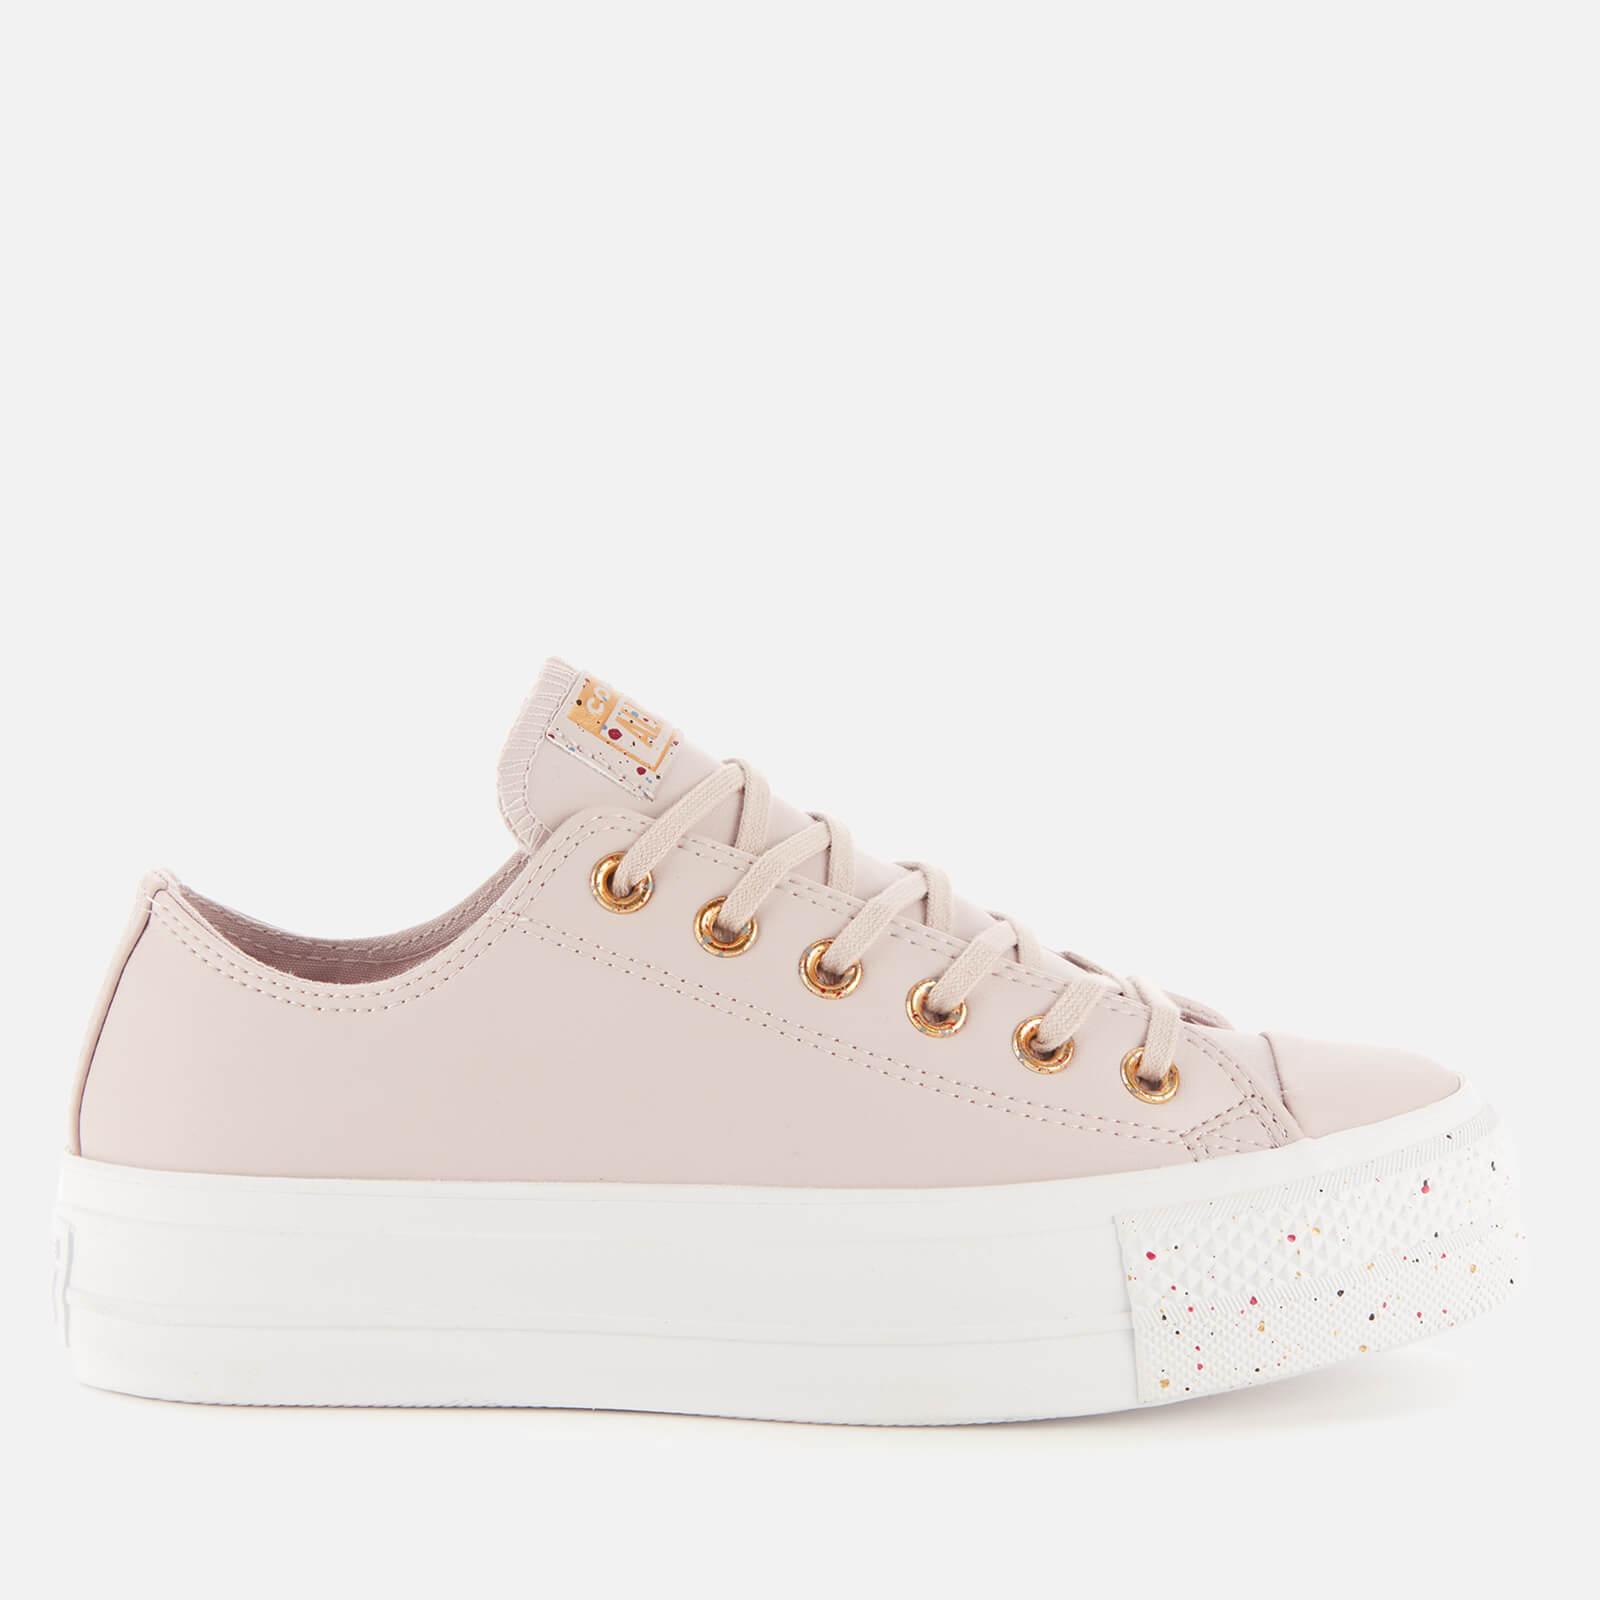 converse chuck taylor all star rose pale